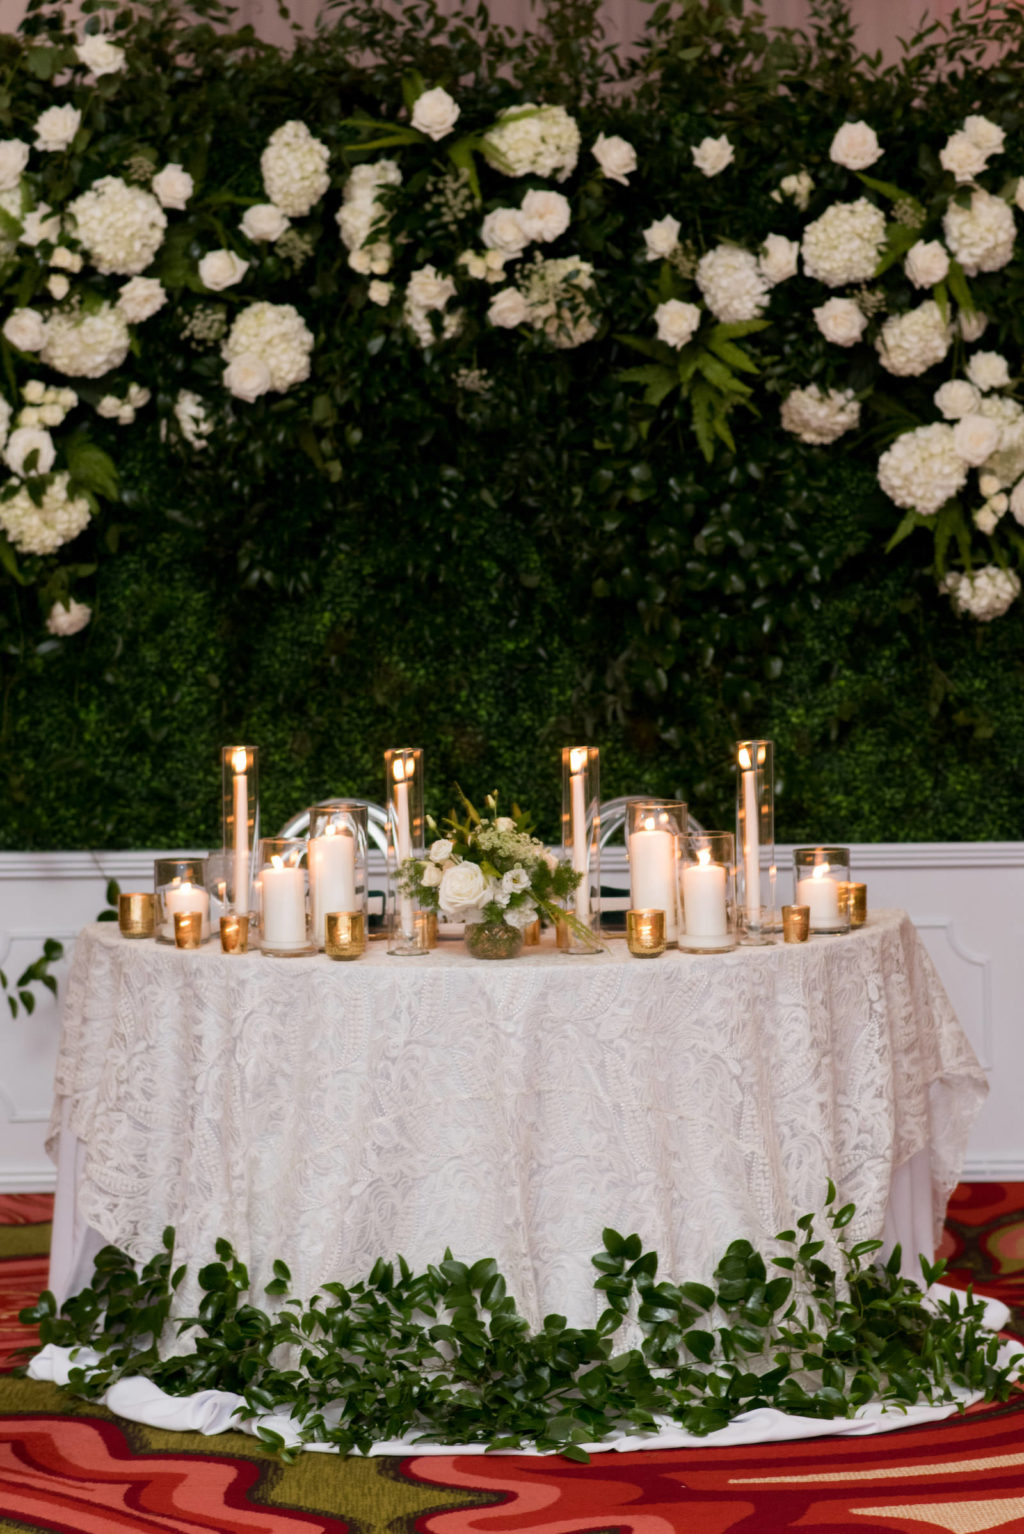 Elegant Wedding Reception Decor, Sweetheart Table with Ivory Lace Linen, Greenery Leaves, Gold and White Candles, Greenery Backdrop with White Hydrangeas and Roses | Tampa Bay Wedding Planner Parties A'la Carte | St. Pete Wedding Venue The Vinoy | Wedding Rentals A Chair Affair | Wedding Florist Bruce Wayne Florals